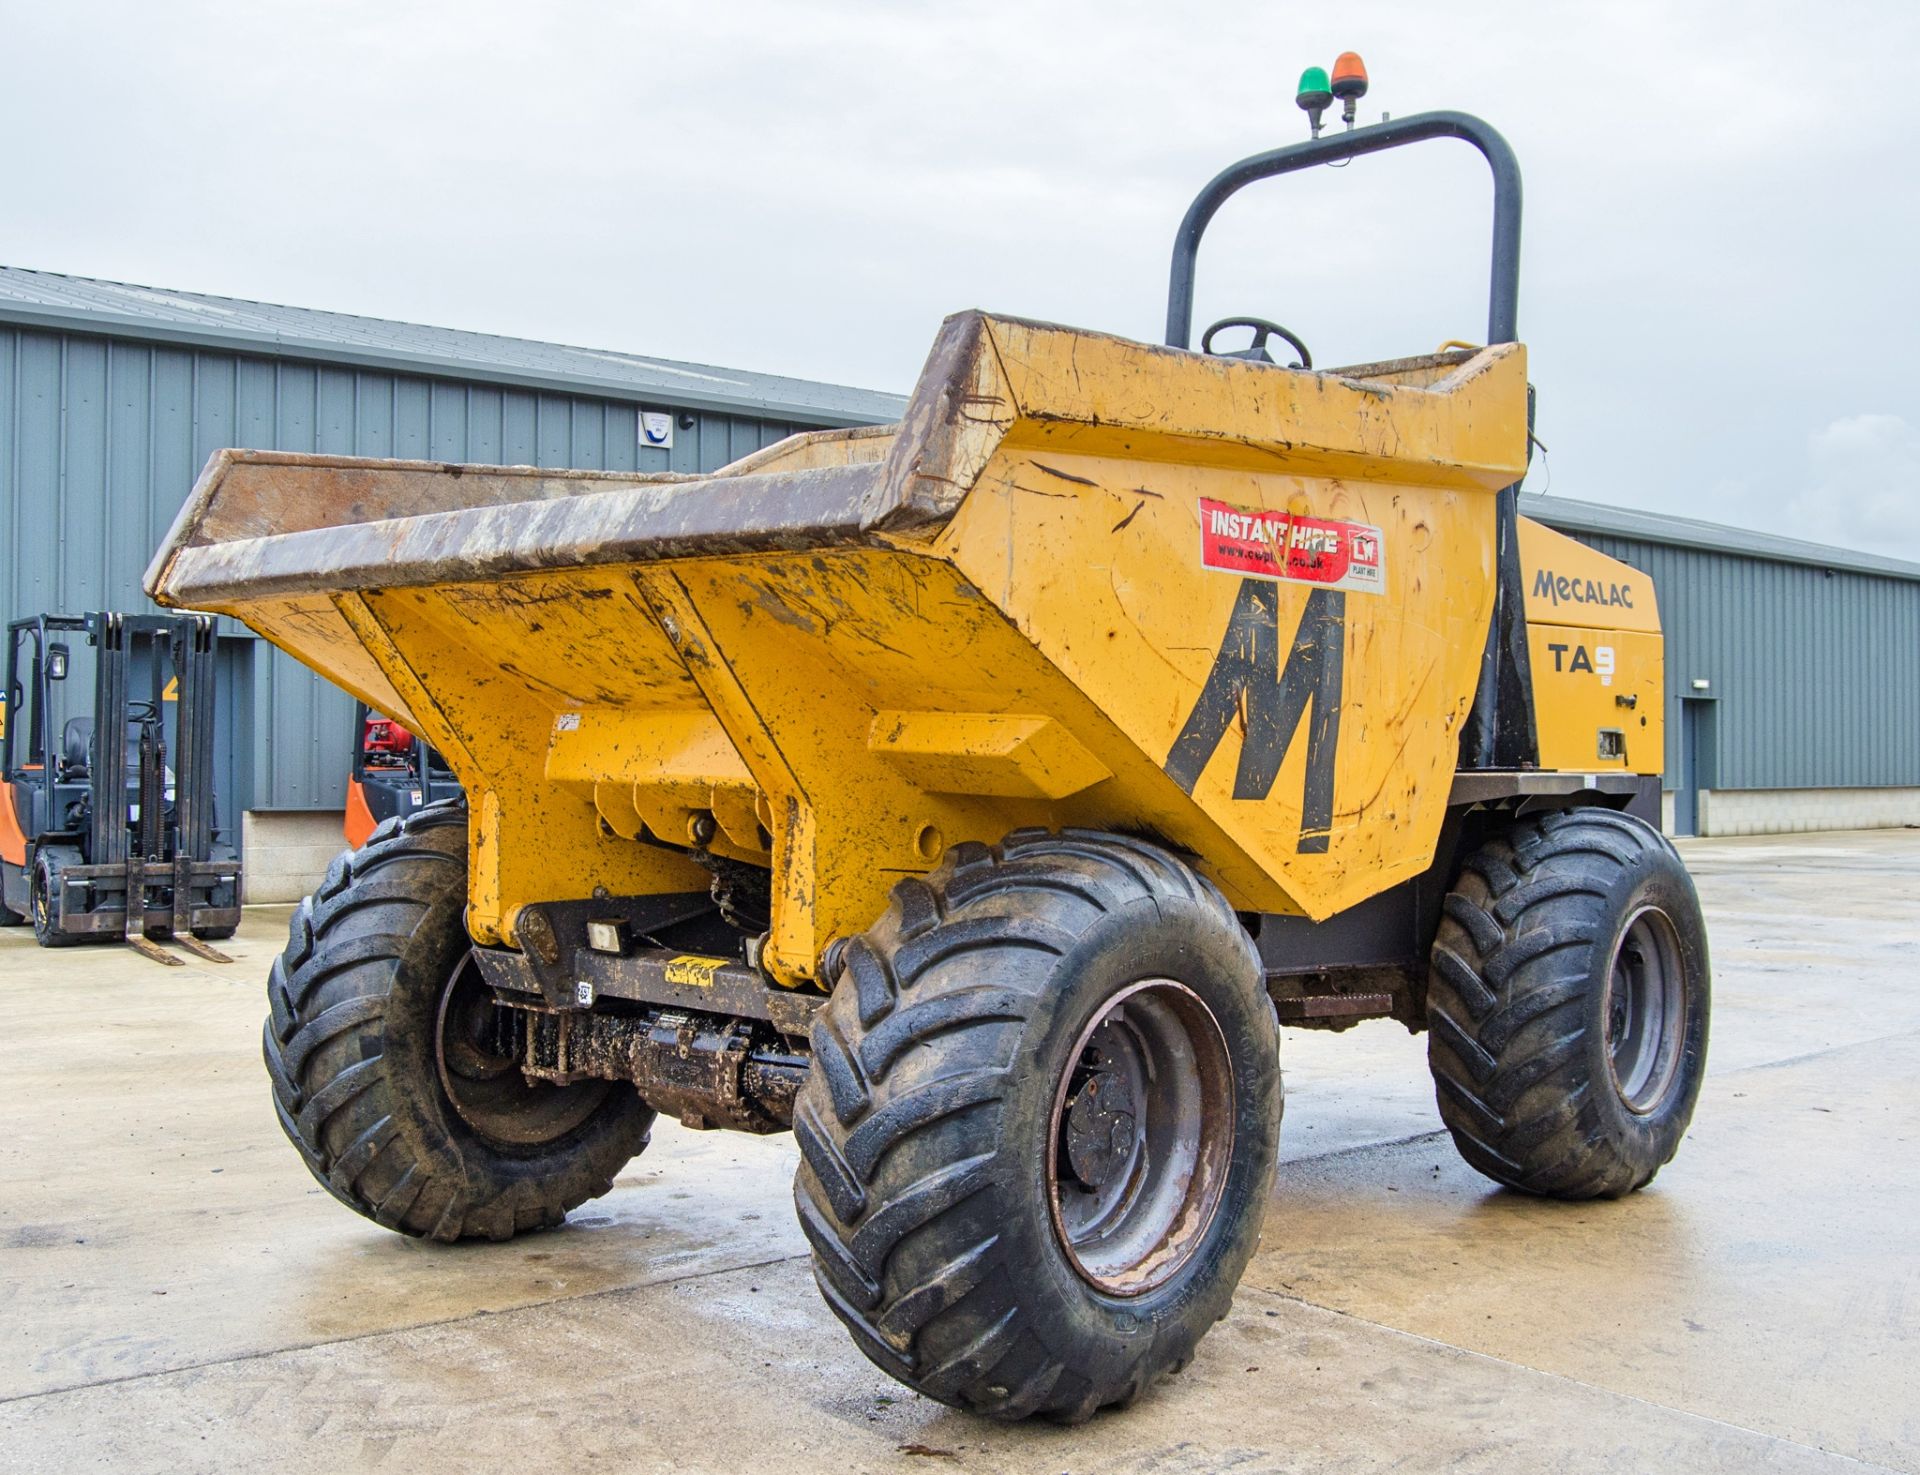 Mecalac TA9 9 tonne straight skip dumper Year: 2018 S/N: EJ2PS4319 Recorded Hours: 2157 82422